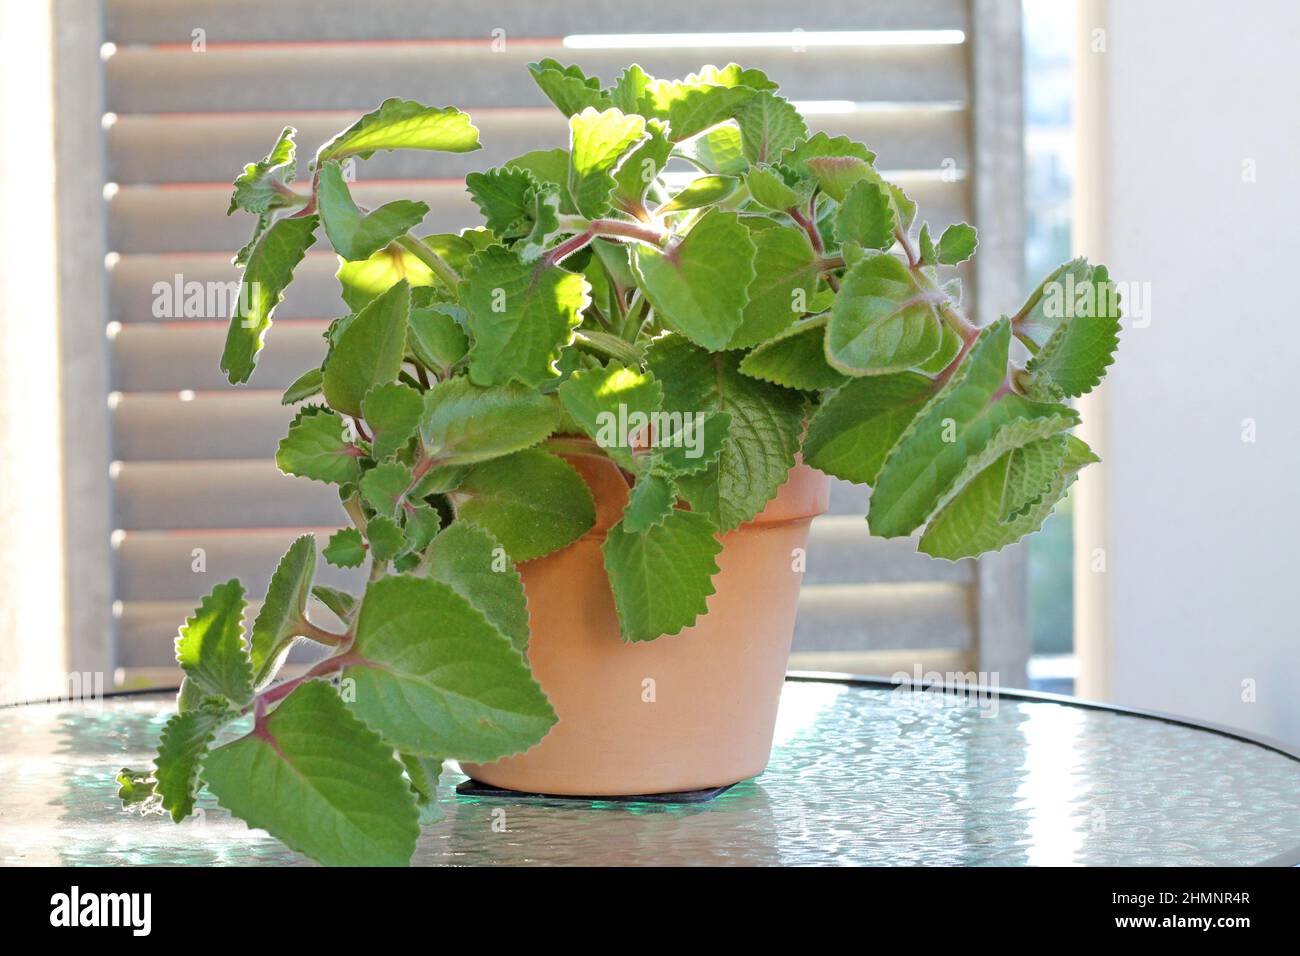 Coleus amboinicus or Plectranthus amboinicus growing in a pot. The herb is used as a spice and ornamental plant. Stock Photo